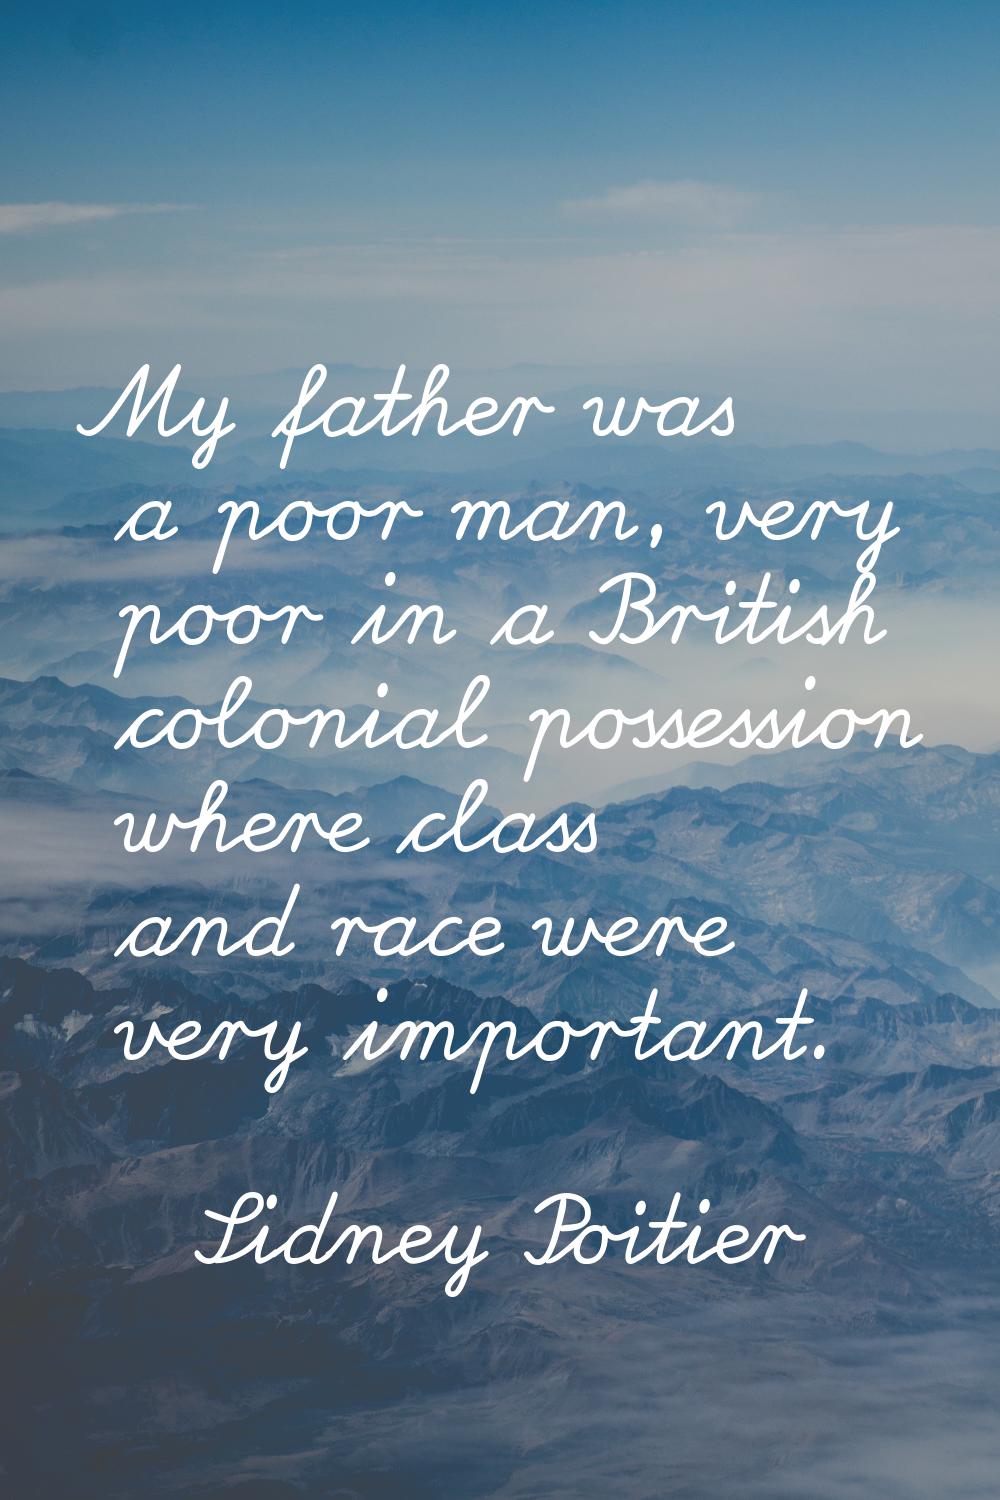 My father was a poor man, very poor in a British colonial possession where class and race were very